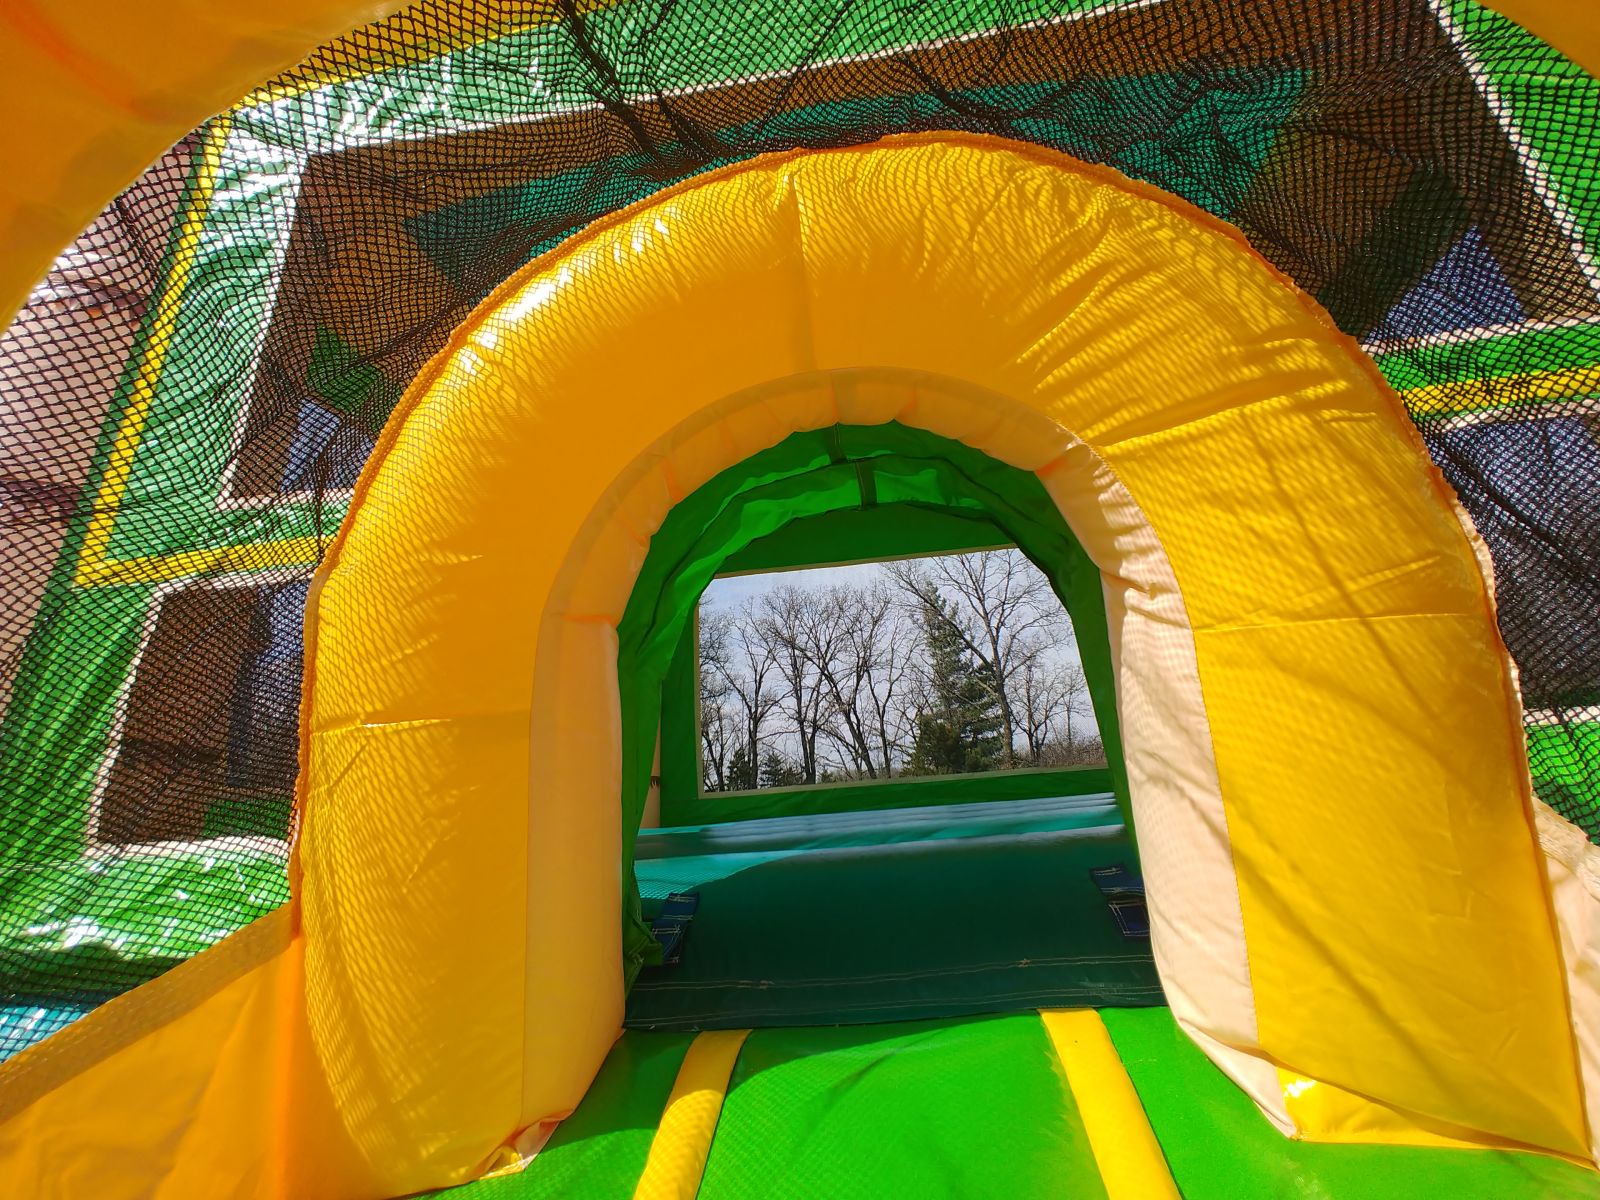 Tunnel entrance into bounce house